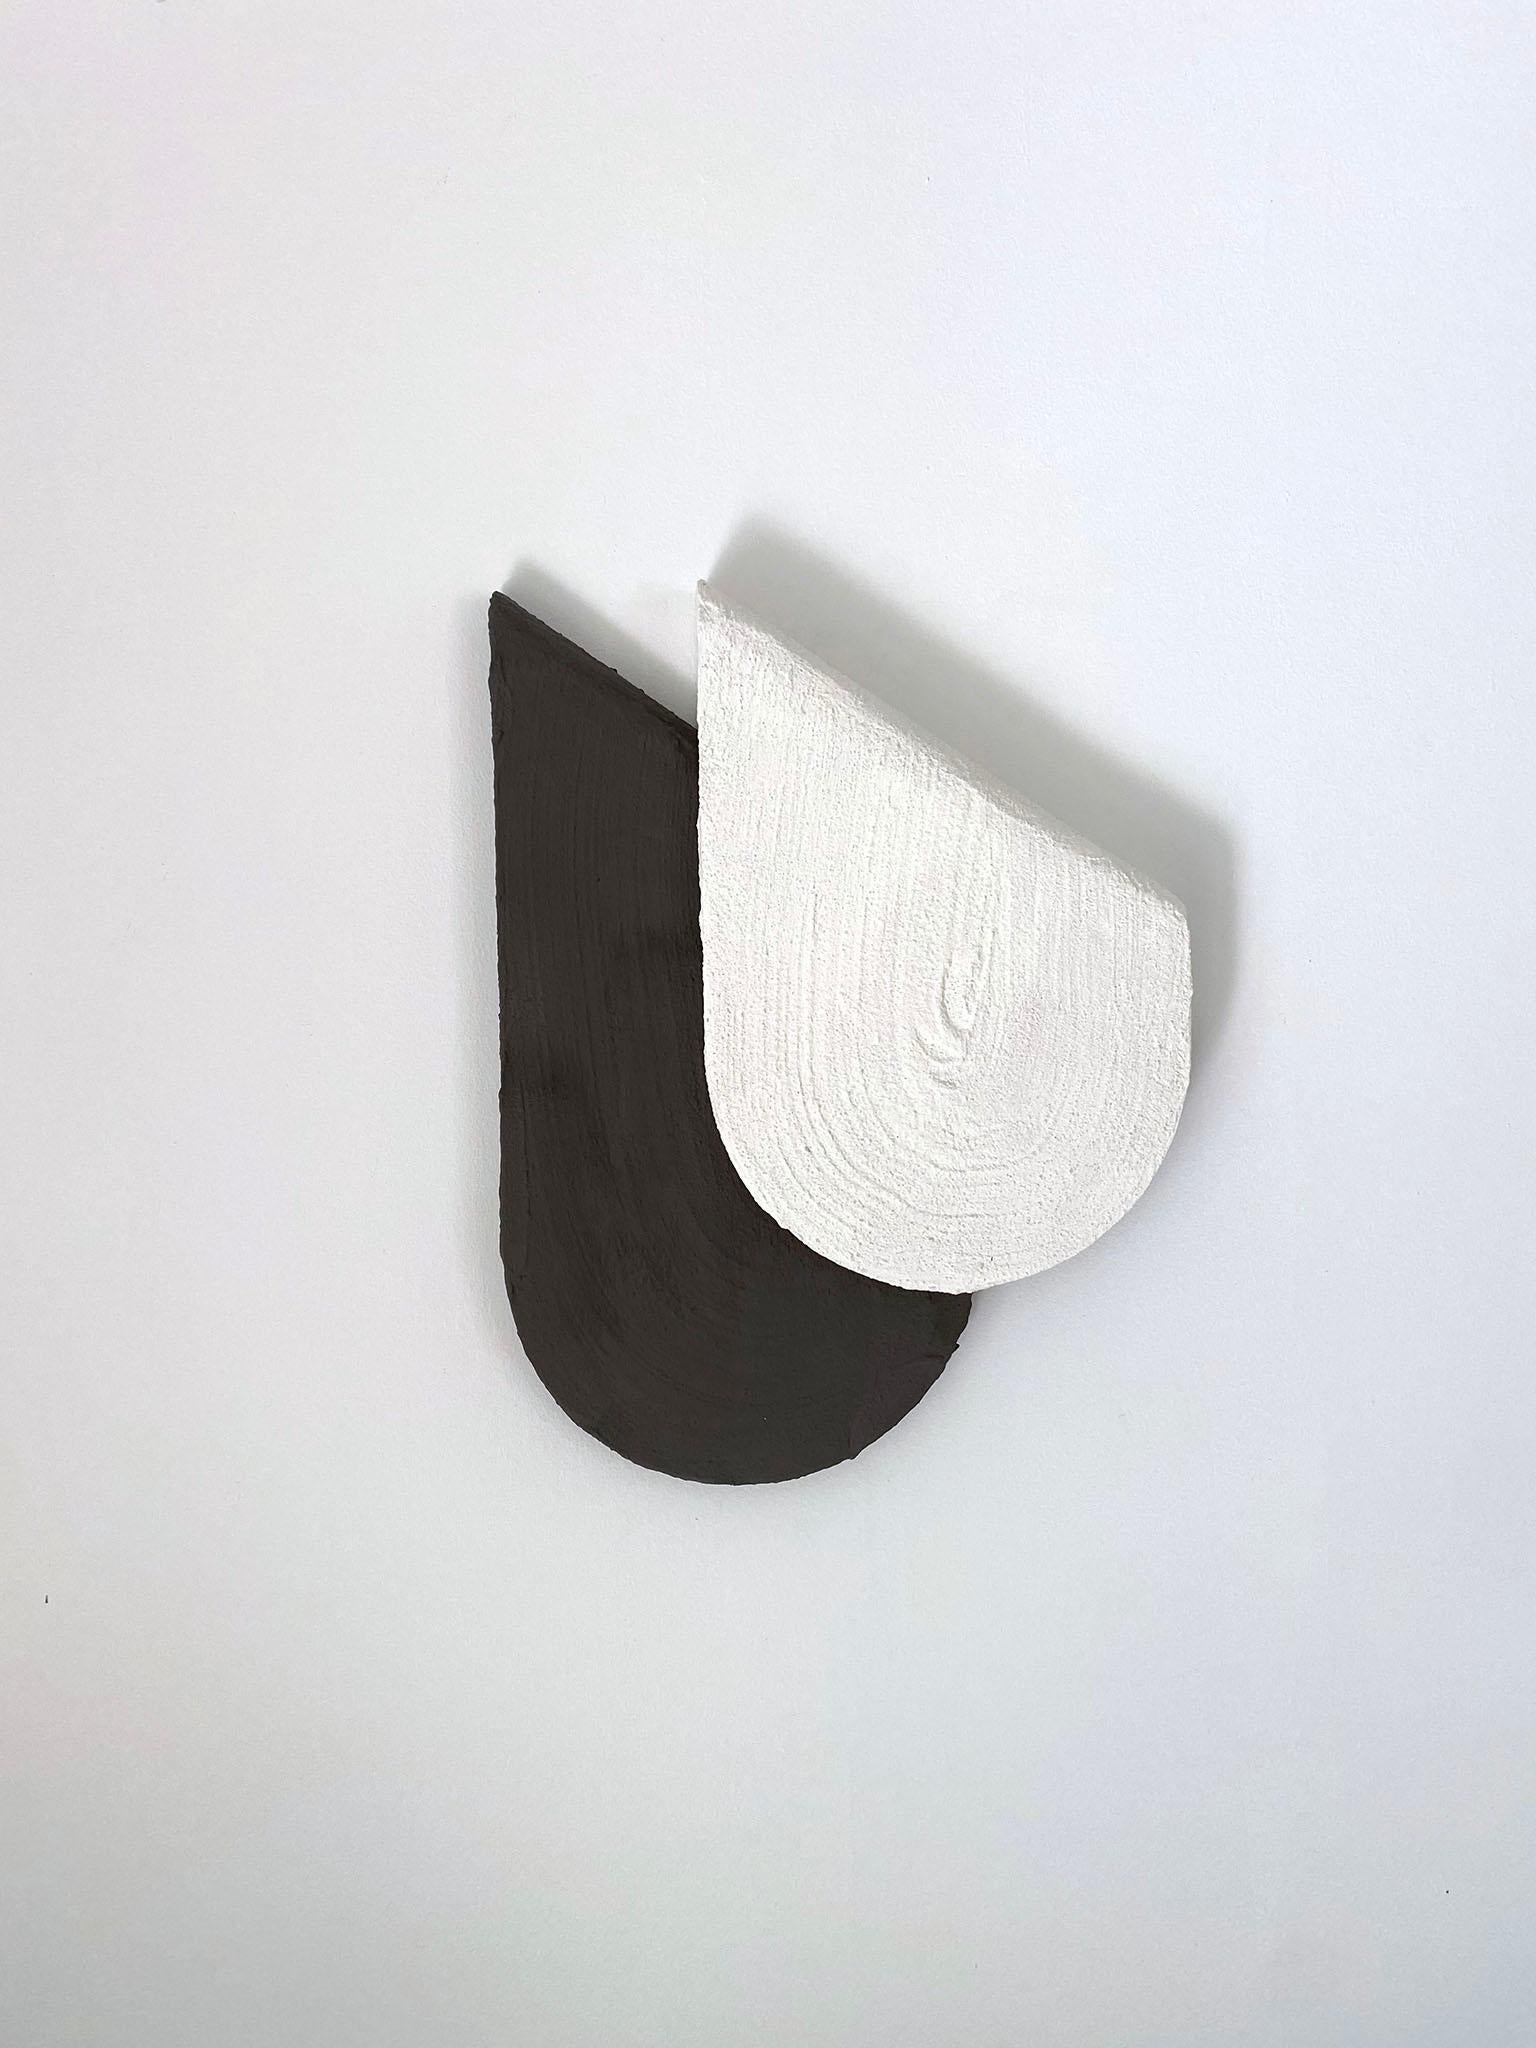 Hand-Crafted Merna, Contemporary Wall Sculpture in Italian Plaster